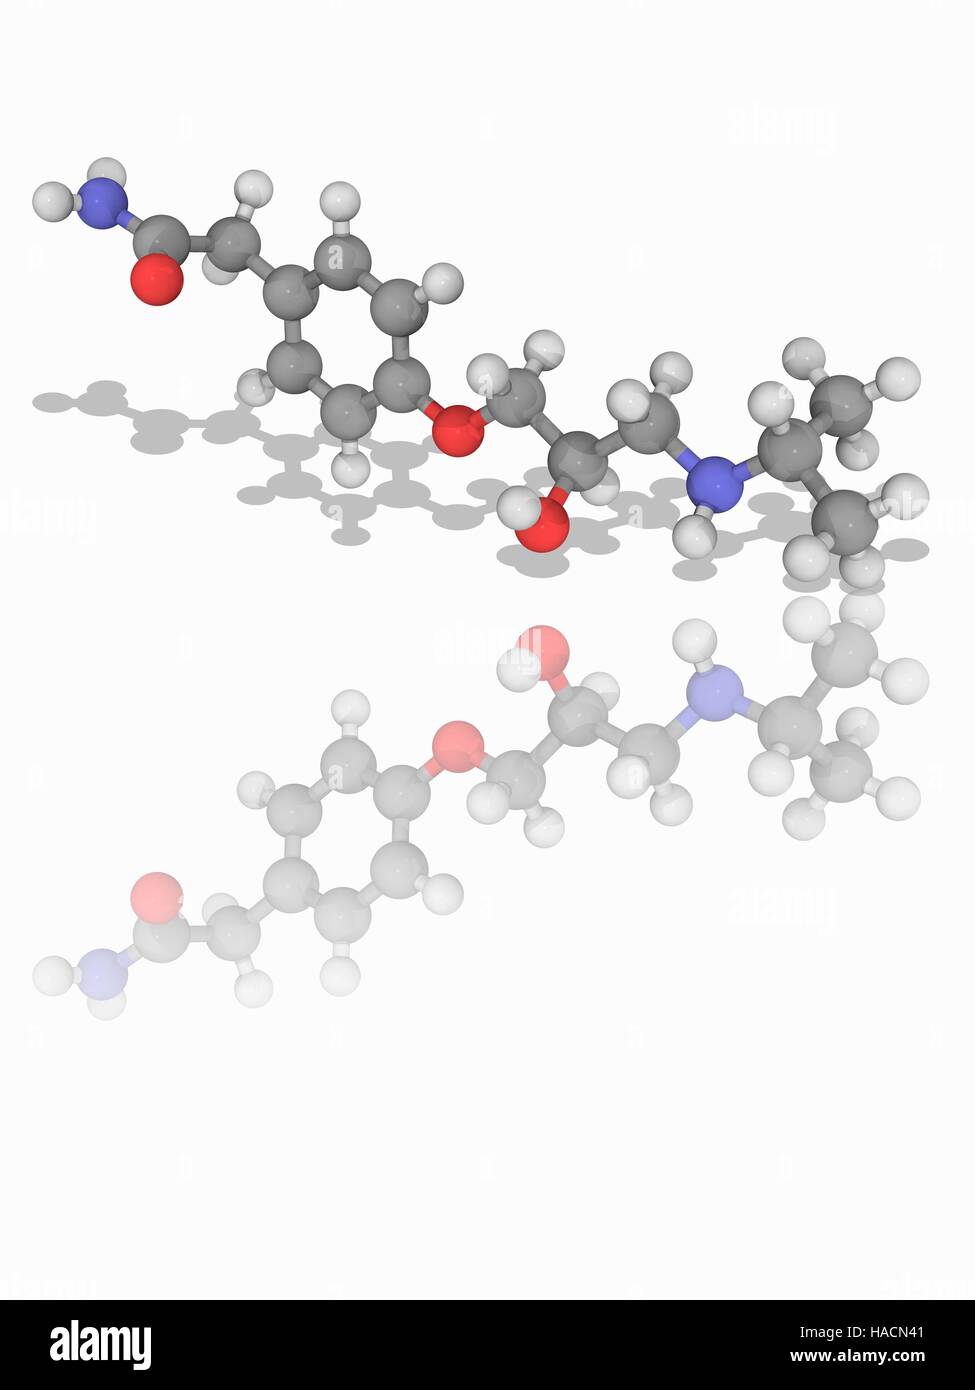 Atenolol. Molecular model of the beta blocker drug atenolol (C14.H22.N2.O3), used to treat hypertension (high blood pressure). Atoms are represented as spheres and are colour-coded: carbon (grey), hydrogen (white), nitrogen (blue) and oxygen (red). Illustration. Stock Photo